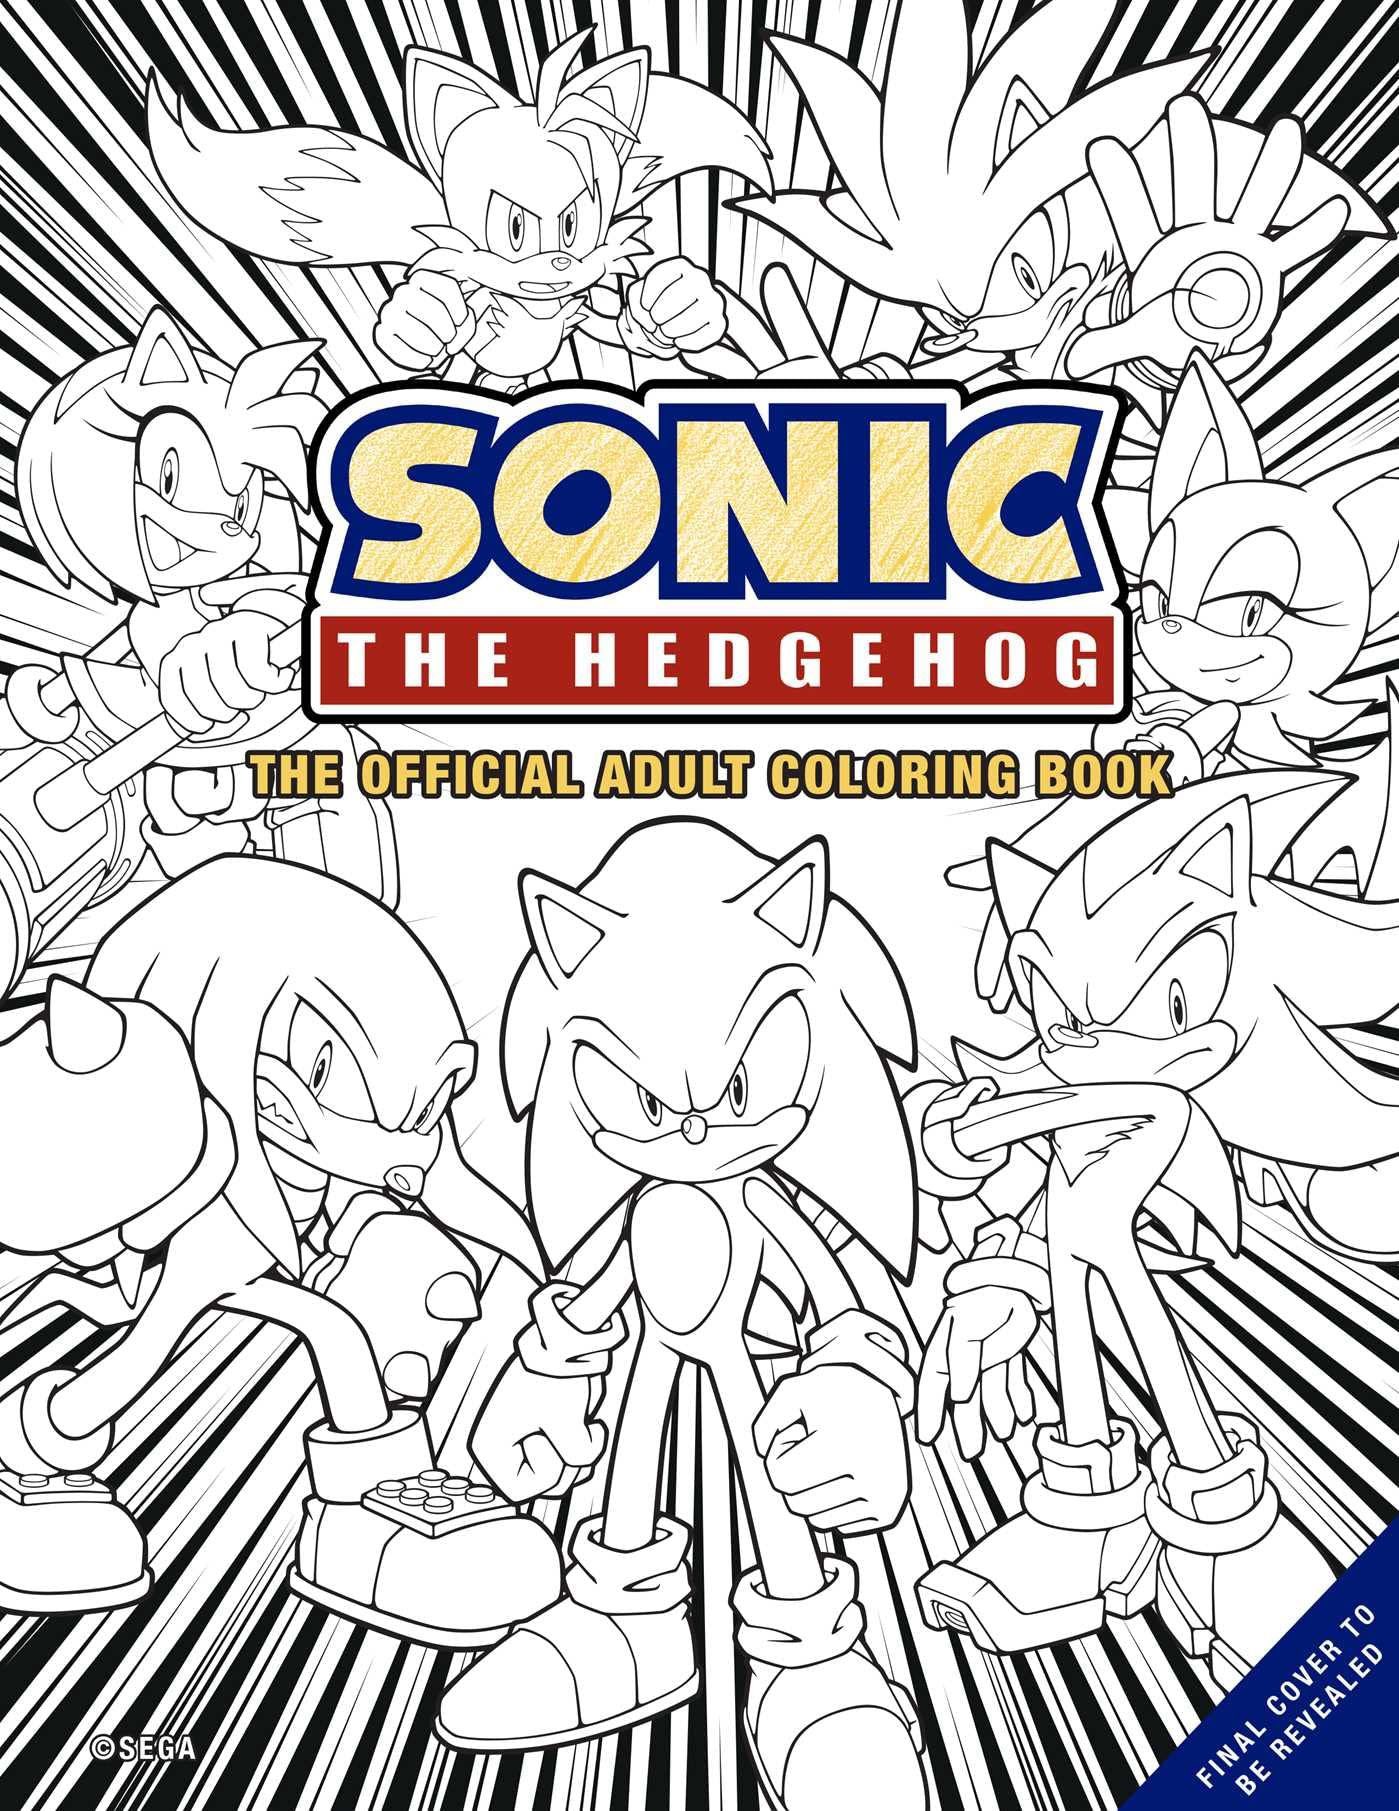 Idwsonicnews on x sonic the hedgehog the official adult coloring book ðreleases october ð ð pages sonic sonicthehedgehog sonicnews httpstcojpsyxmyci x